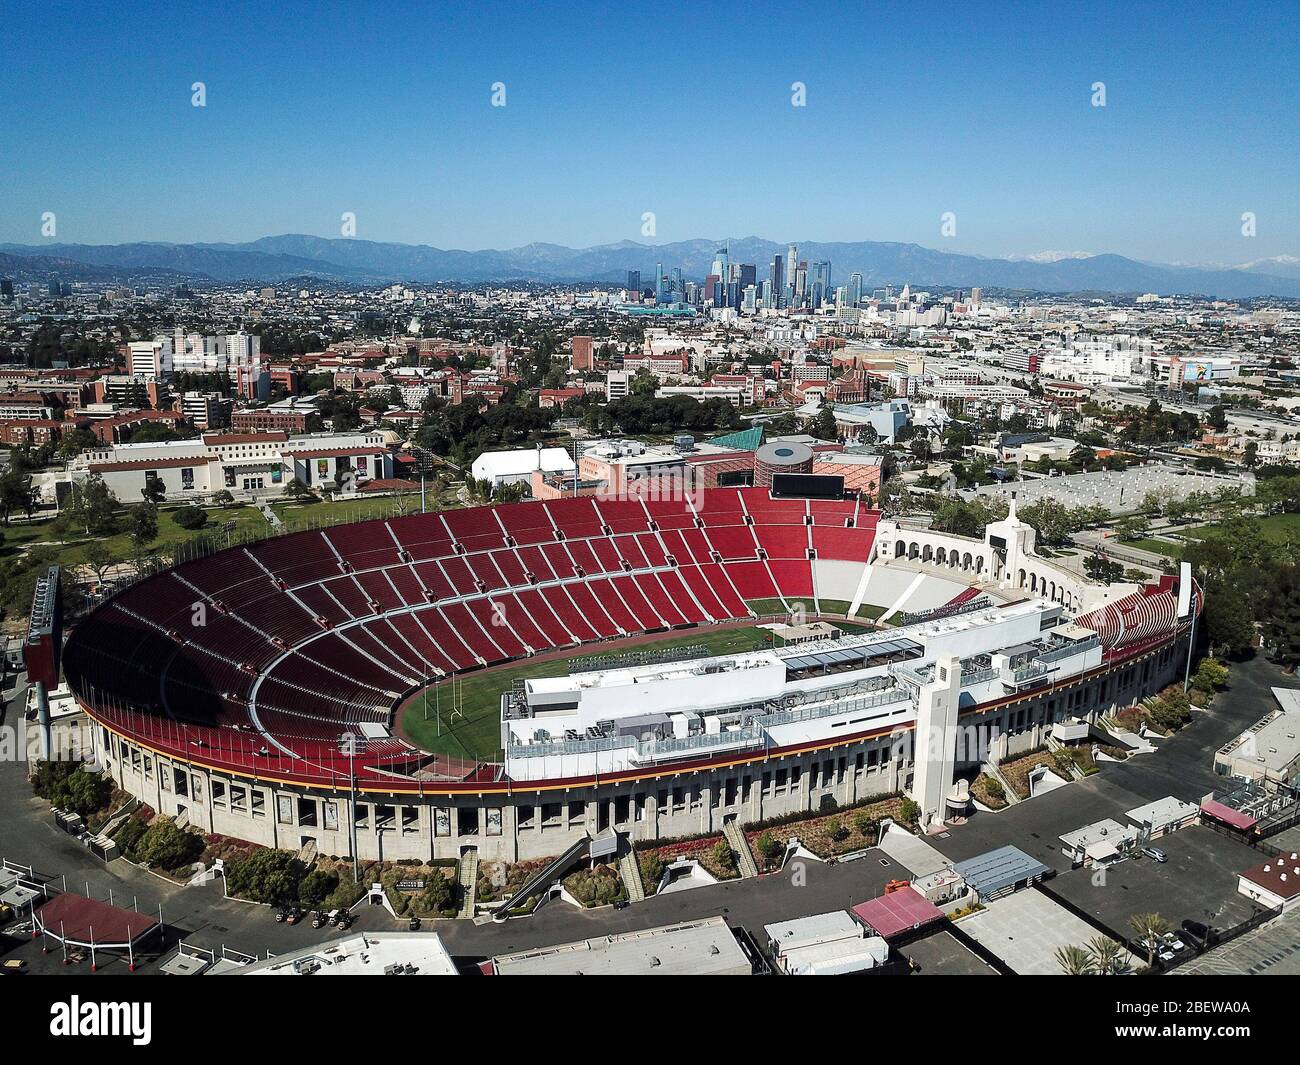 Los Angeles, California, USA. 15th Apr, 2020. An aerial view shows the Los Angeles Memorial Coliseum with downtown Los Angeles skyline in background on April 15, 2020. Los Angeles Mayor Eric Garcetti said today he doesn't foresee large gatherings, such as sporting events and concerts, happening in the city until 2021, as the region continues to reel from the COVID-19 pandemic. Credit: Ringo Chiu/ZUMA Wire/Alamy Live News Stock Photo